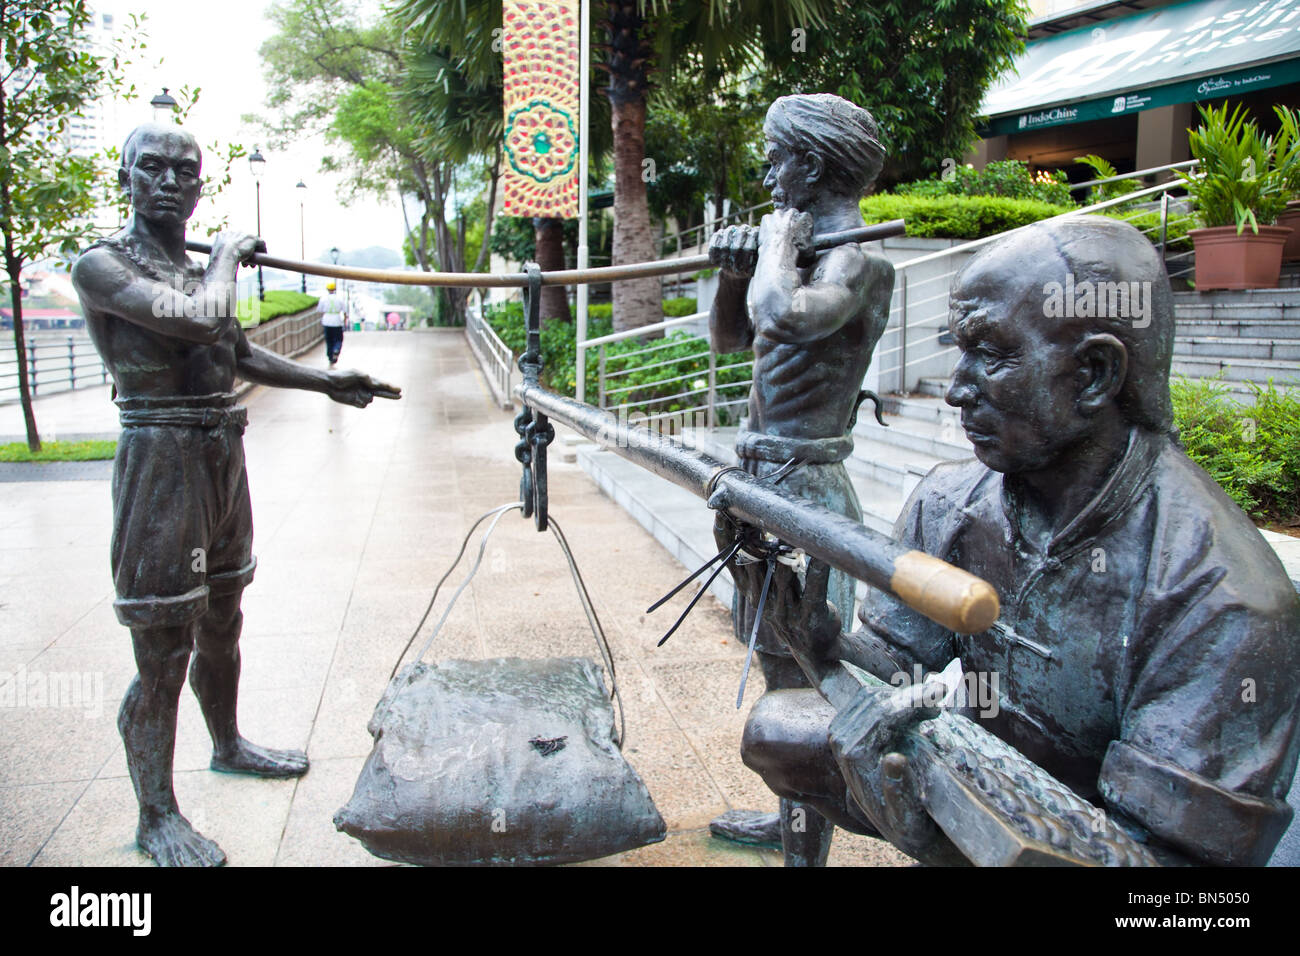 A bronze statue that depicts Chinese, Indian, and Malay laborers working together to build Singapore Stock Photo